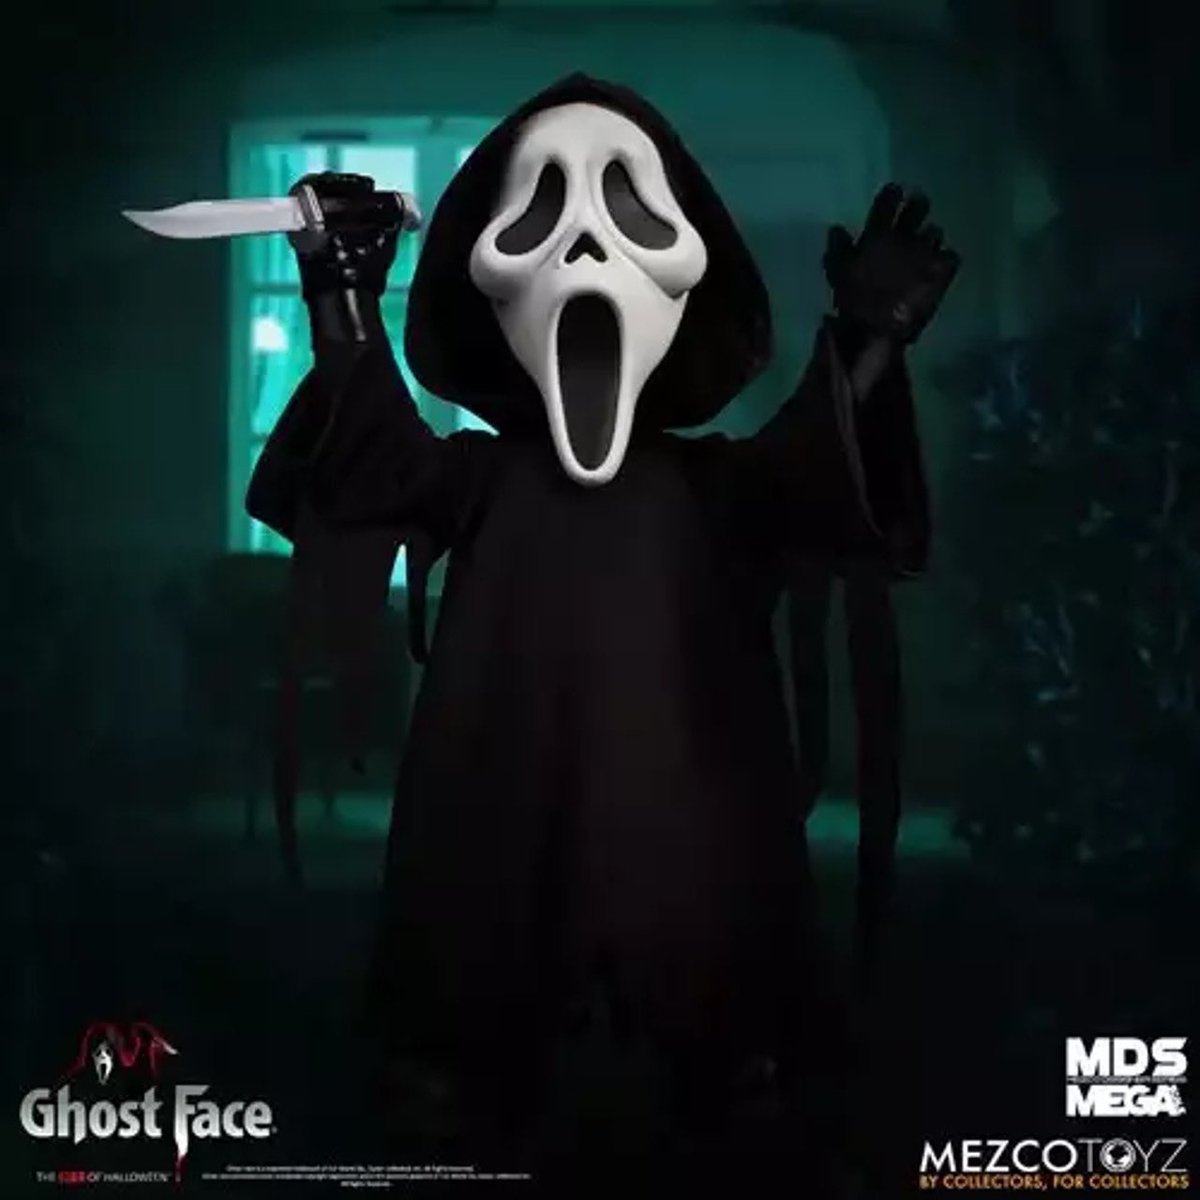 😱 SHIPPING SOON 😱 Ghost Face MDS 15” Doll

Order yours! 👉🏼 thelasttoystore.com/ghost-face-mds…

➖
#mezco #mezcotoyz #mezcomds #MDS #ghostface #scream #horrormovies #horrorcollector #horrorcommunity #instatoys #toystagram #instahorror #horrorgram #thelasttoystore